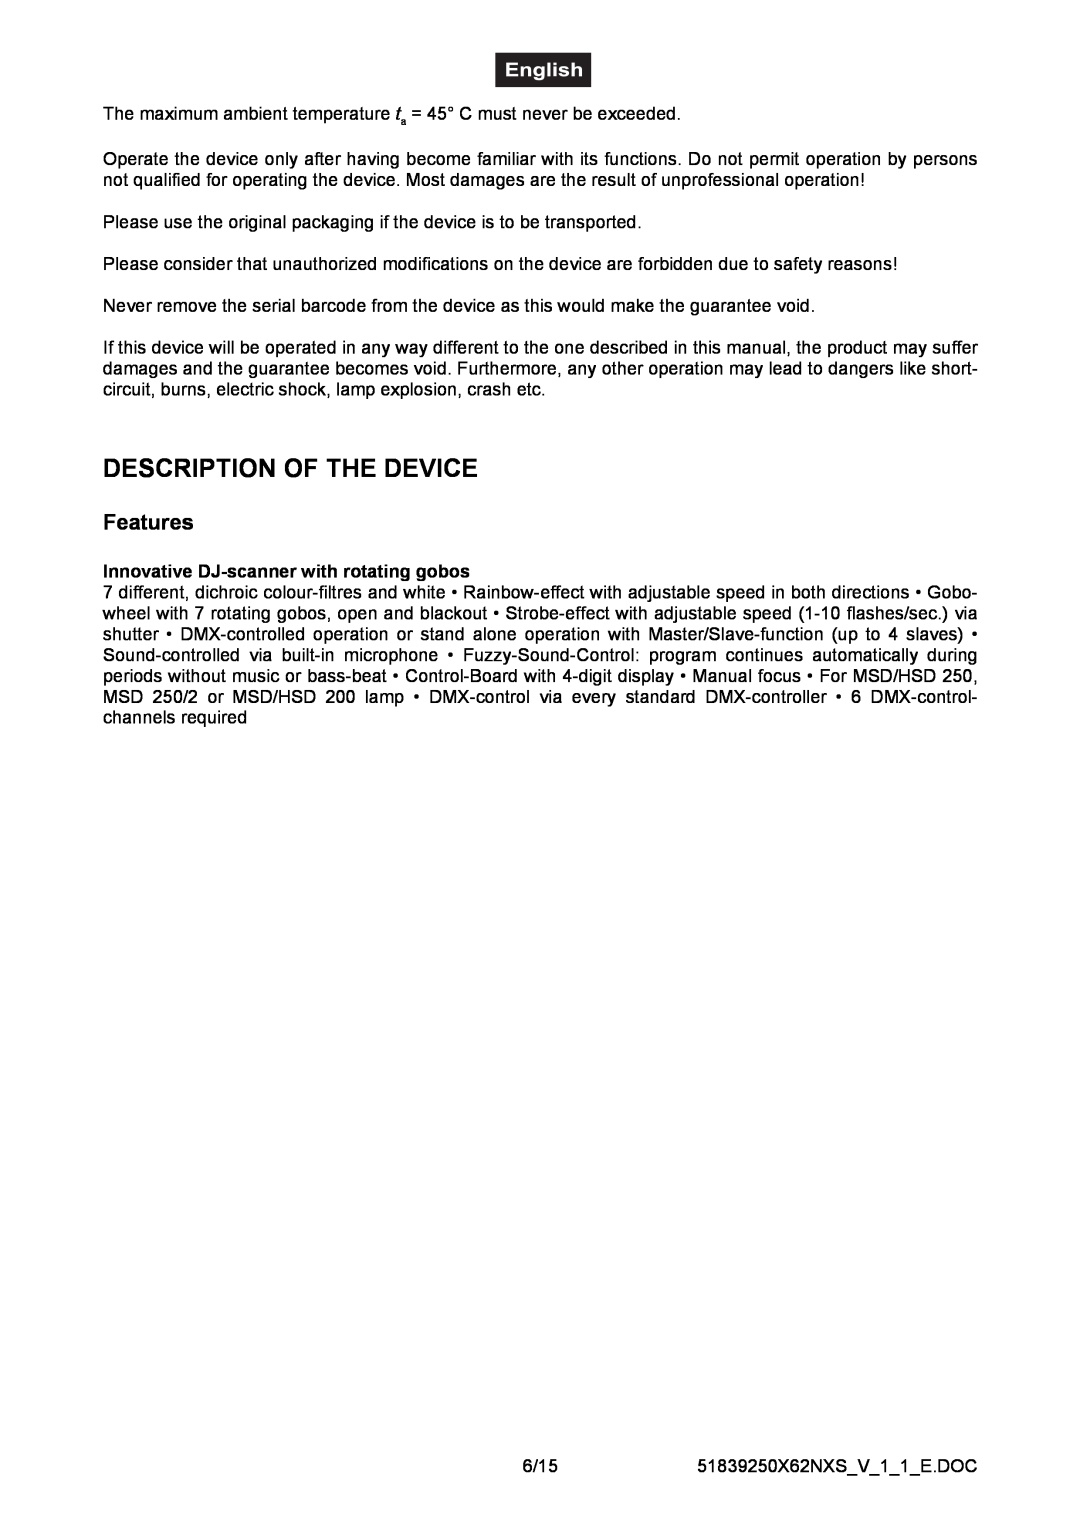 Futuretech 250 user manual Description Of The Device, Features, Innovative DJ-scanner with rotating gobos 